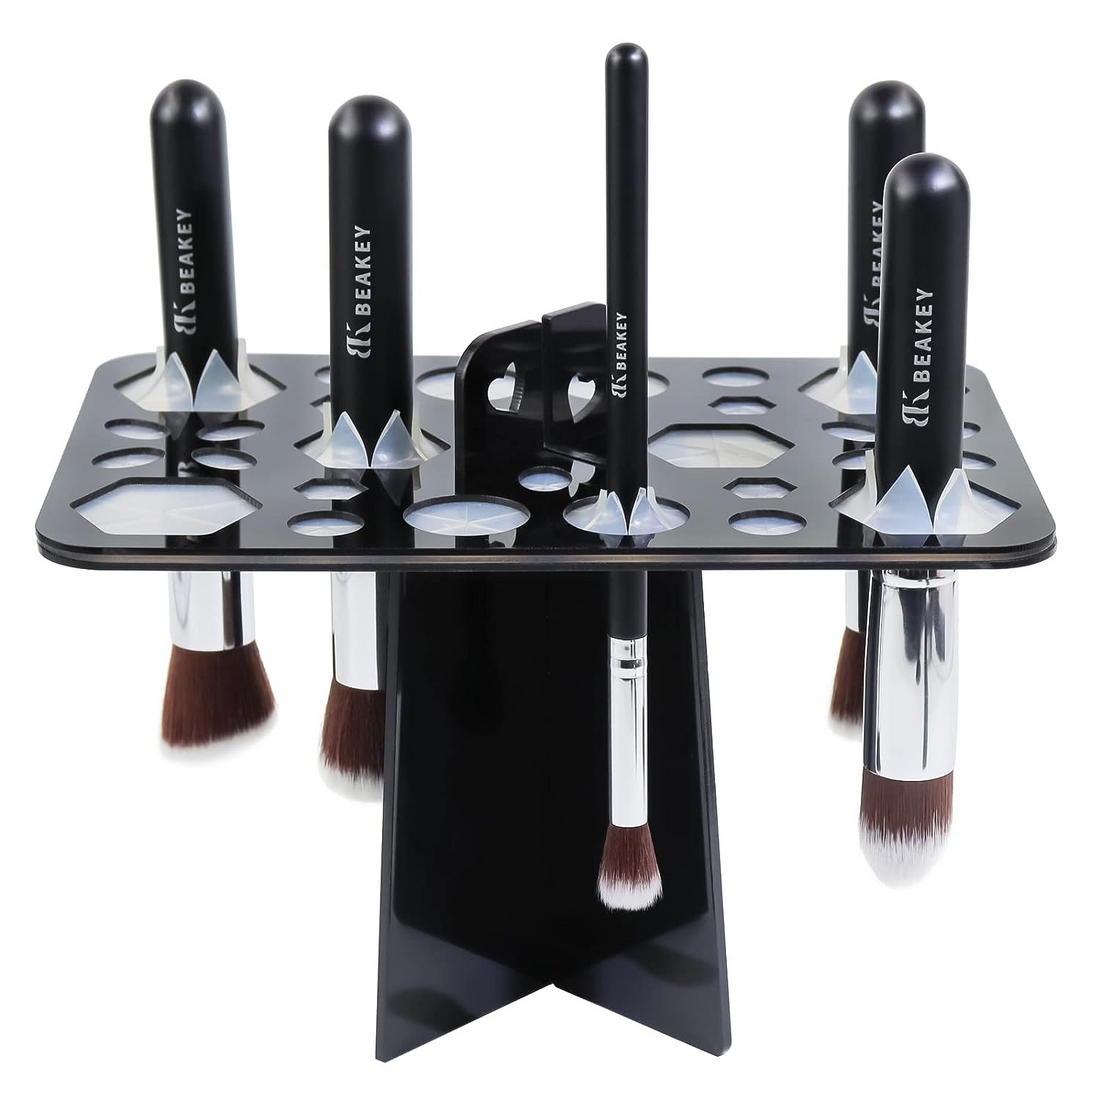 The Best Companion For Makeup Brushes - Makeup Brush Drying Rack